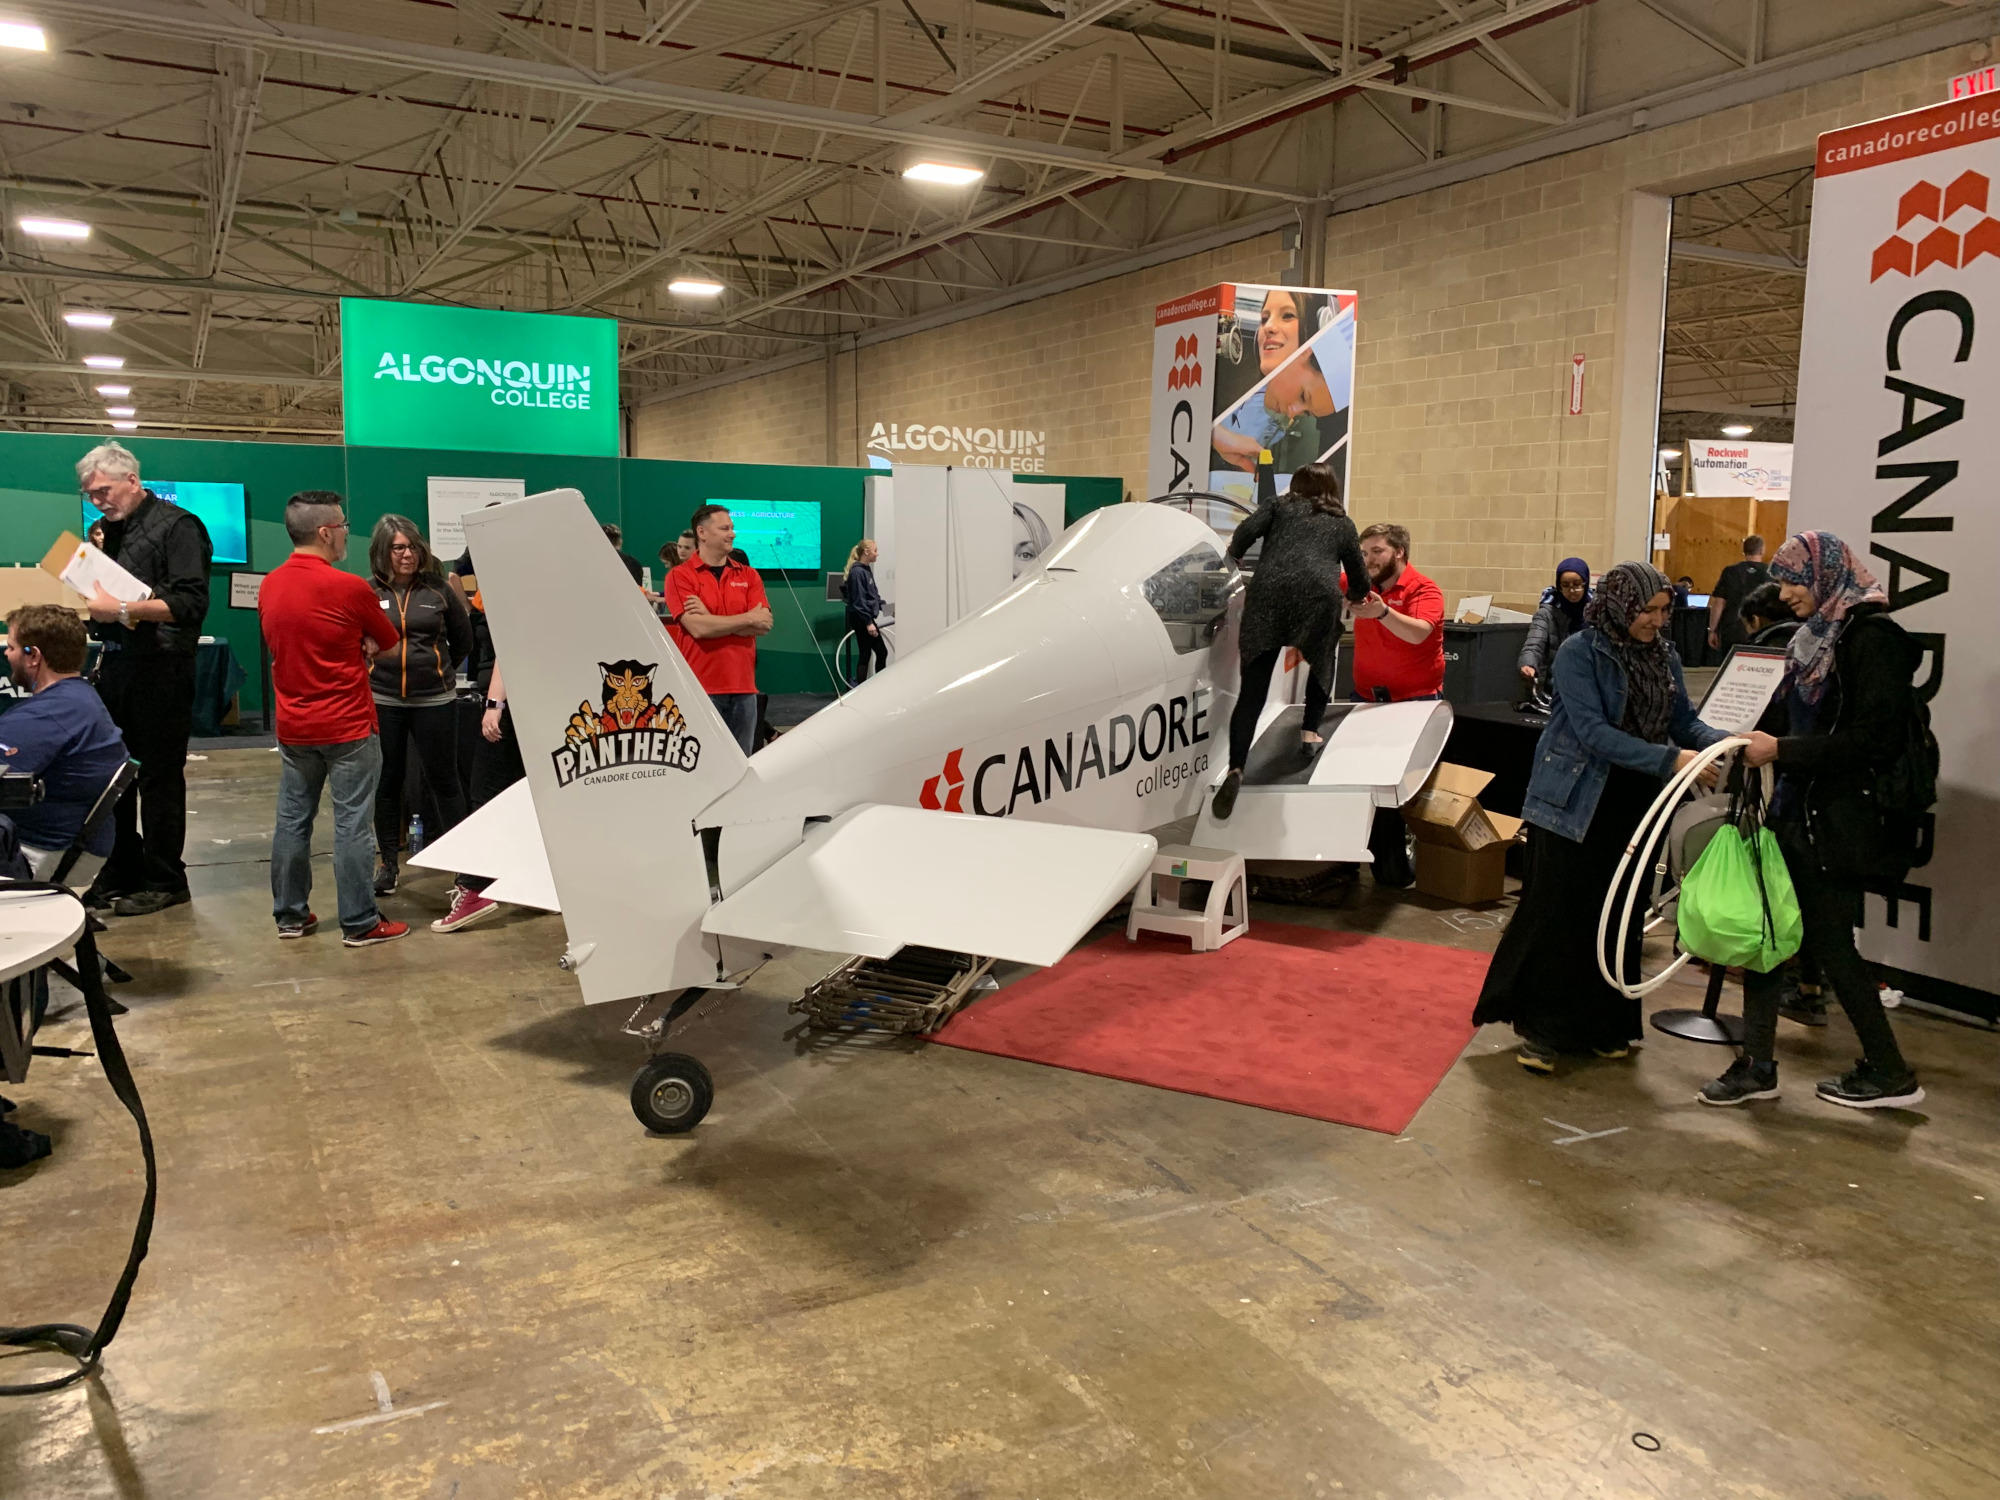 Skills Ontario 2019 Competition. Just a random small aircraft inside the venue.